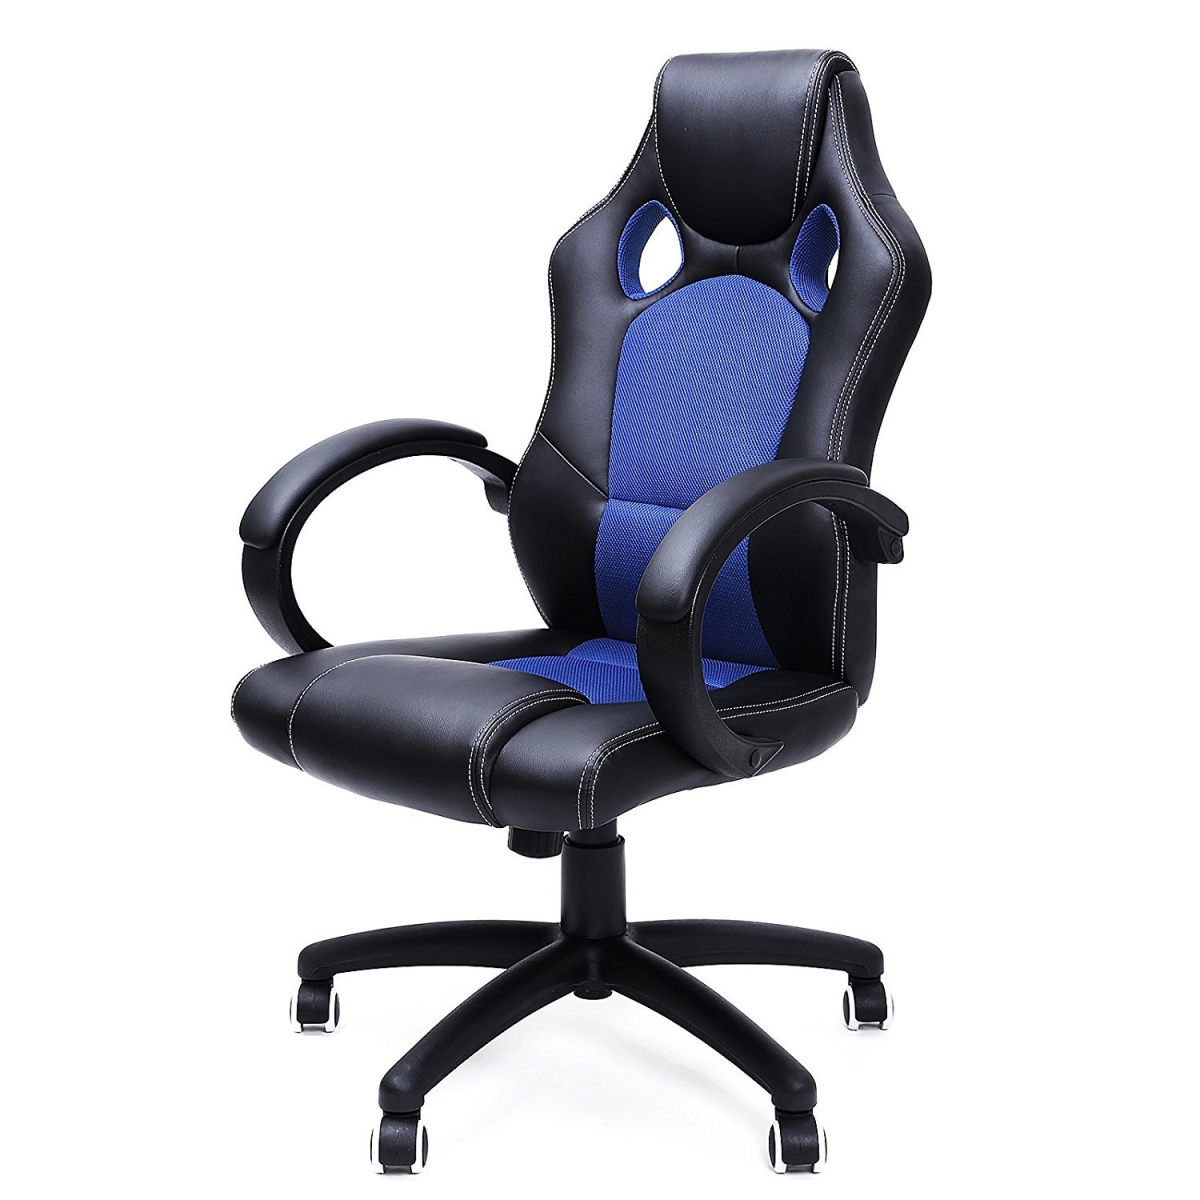 Tyfc210033 31.5 In. Executive High Back Gaming Style Chair, Black & Blue